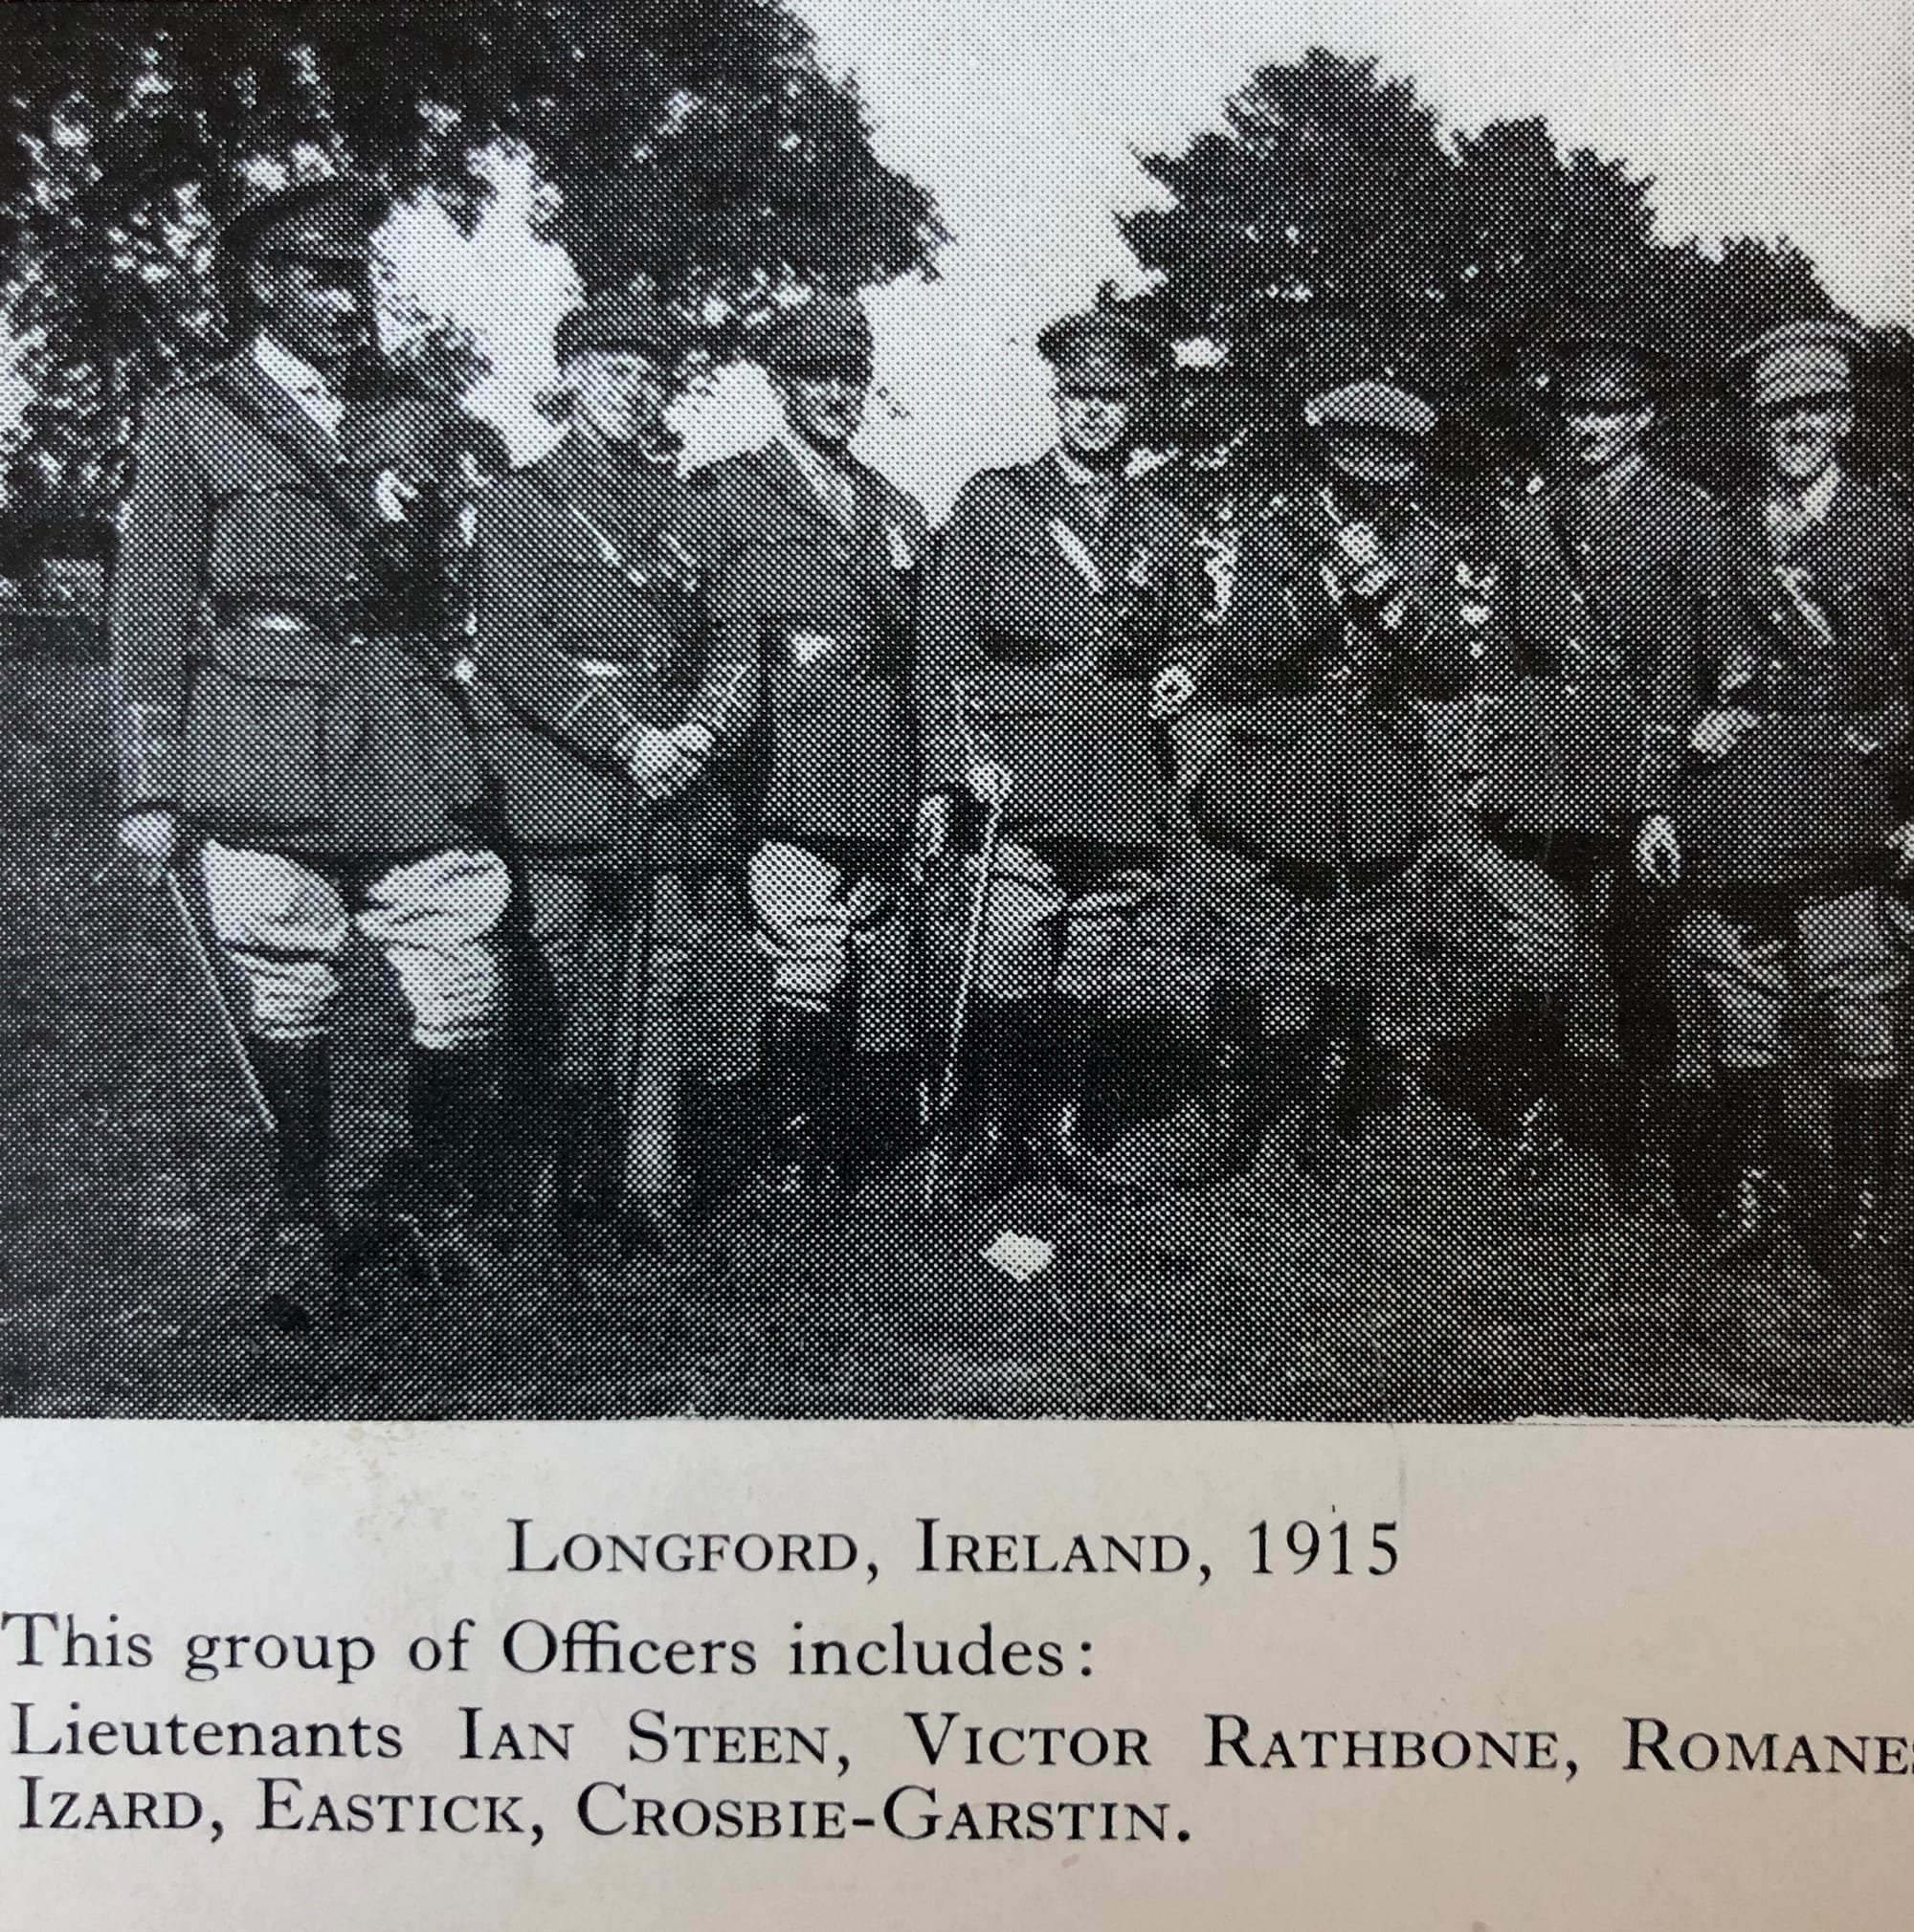 Victor Rathbone, 106 as a Lieutenant in 1915 at Longford (third from the left). Old Comrades Association Bulletin.